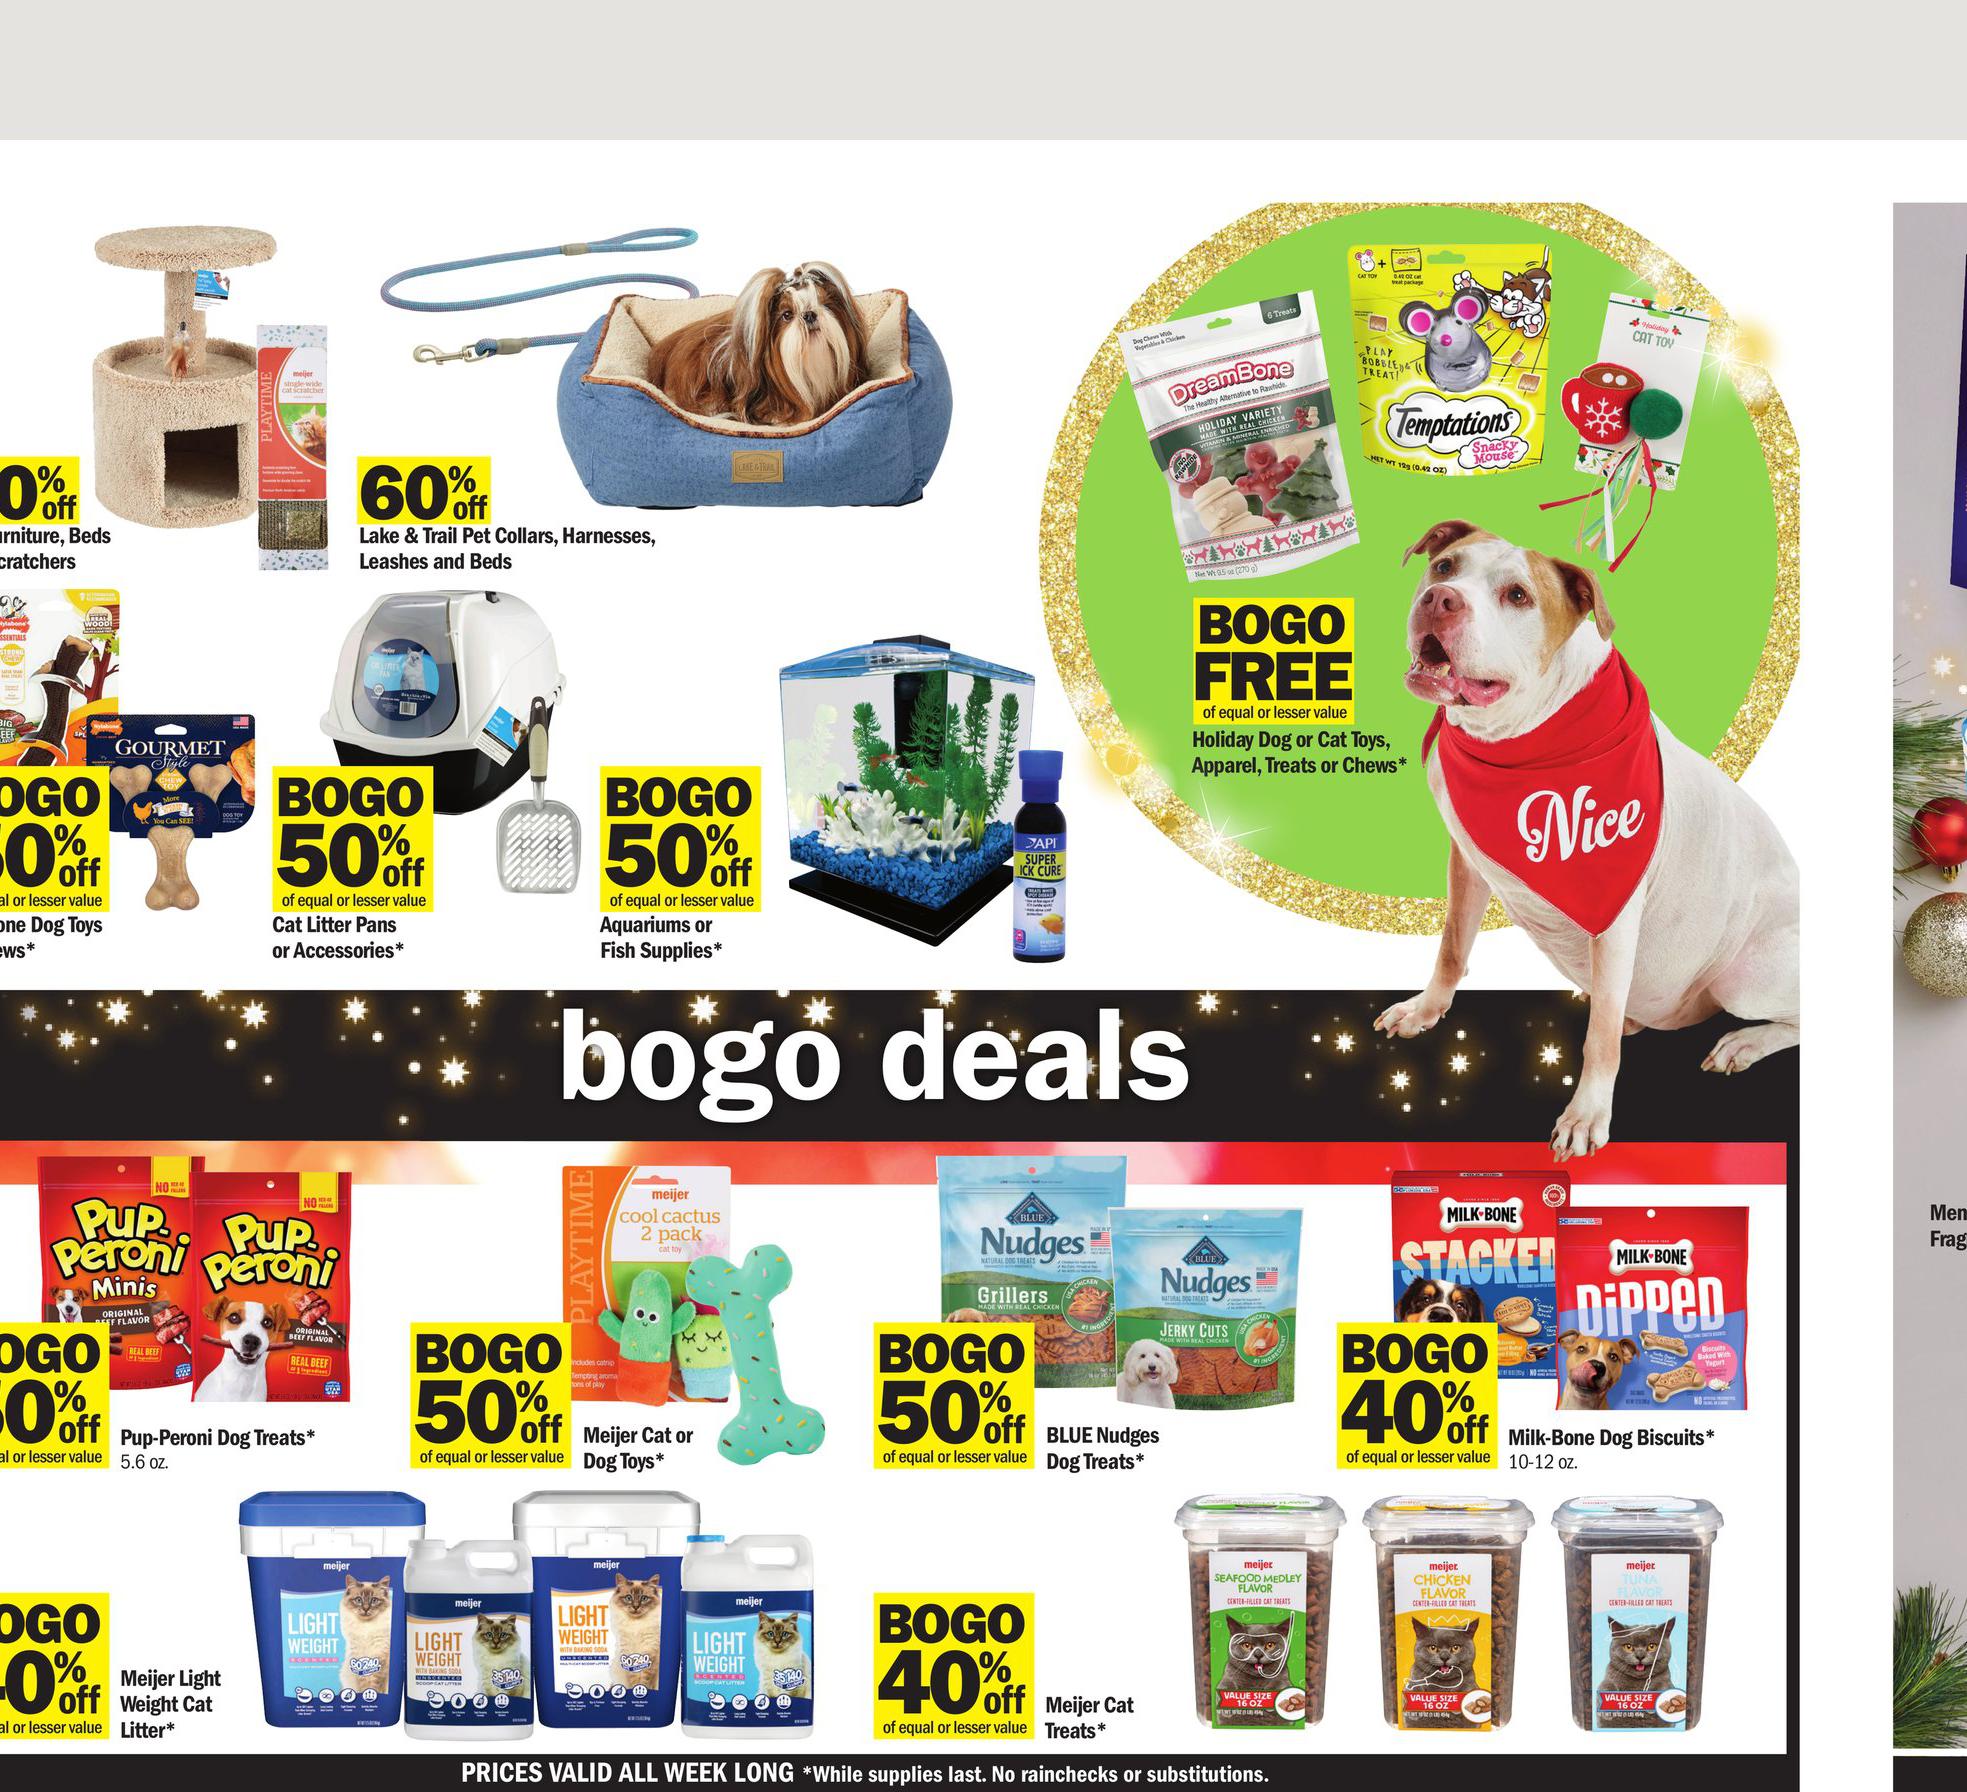 20.11.2022 Meijer ad 28. page